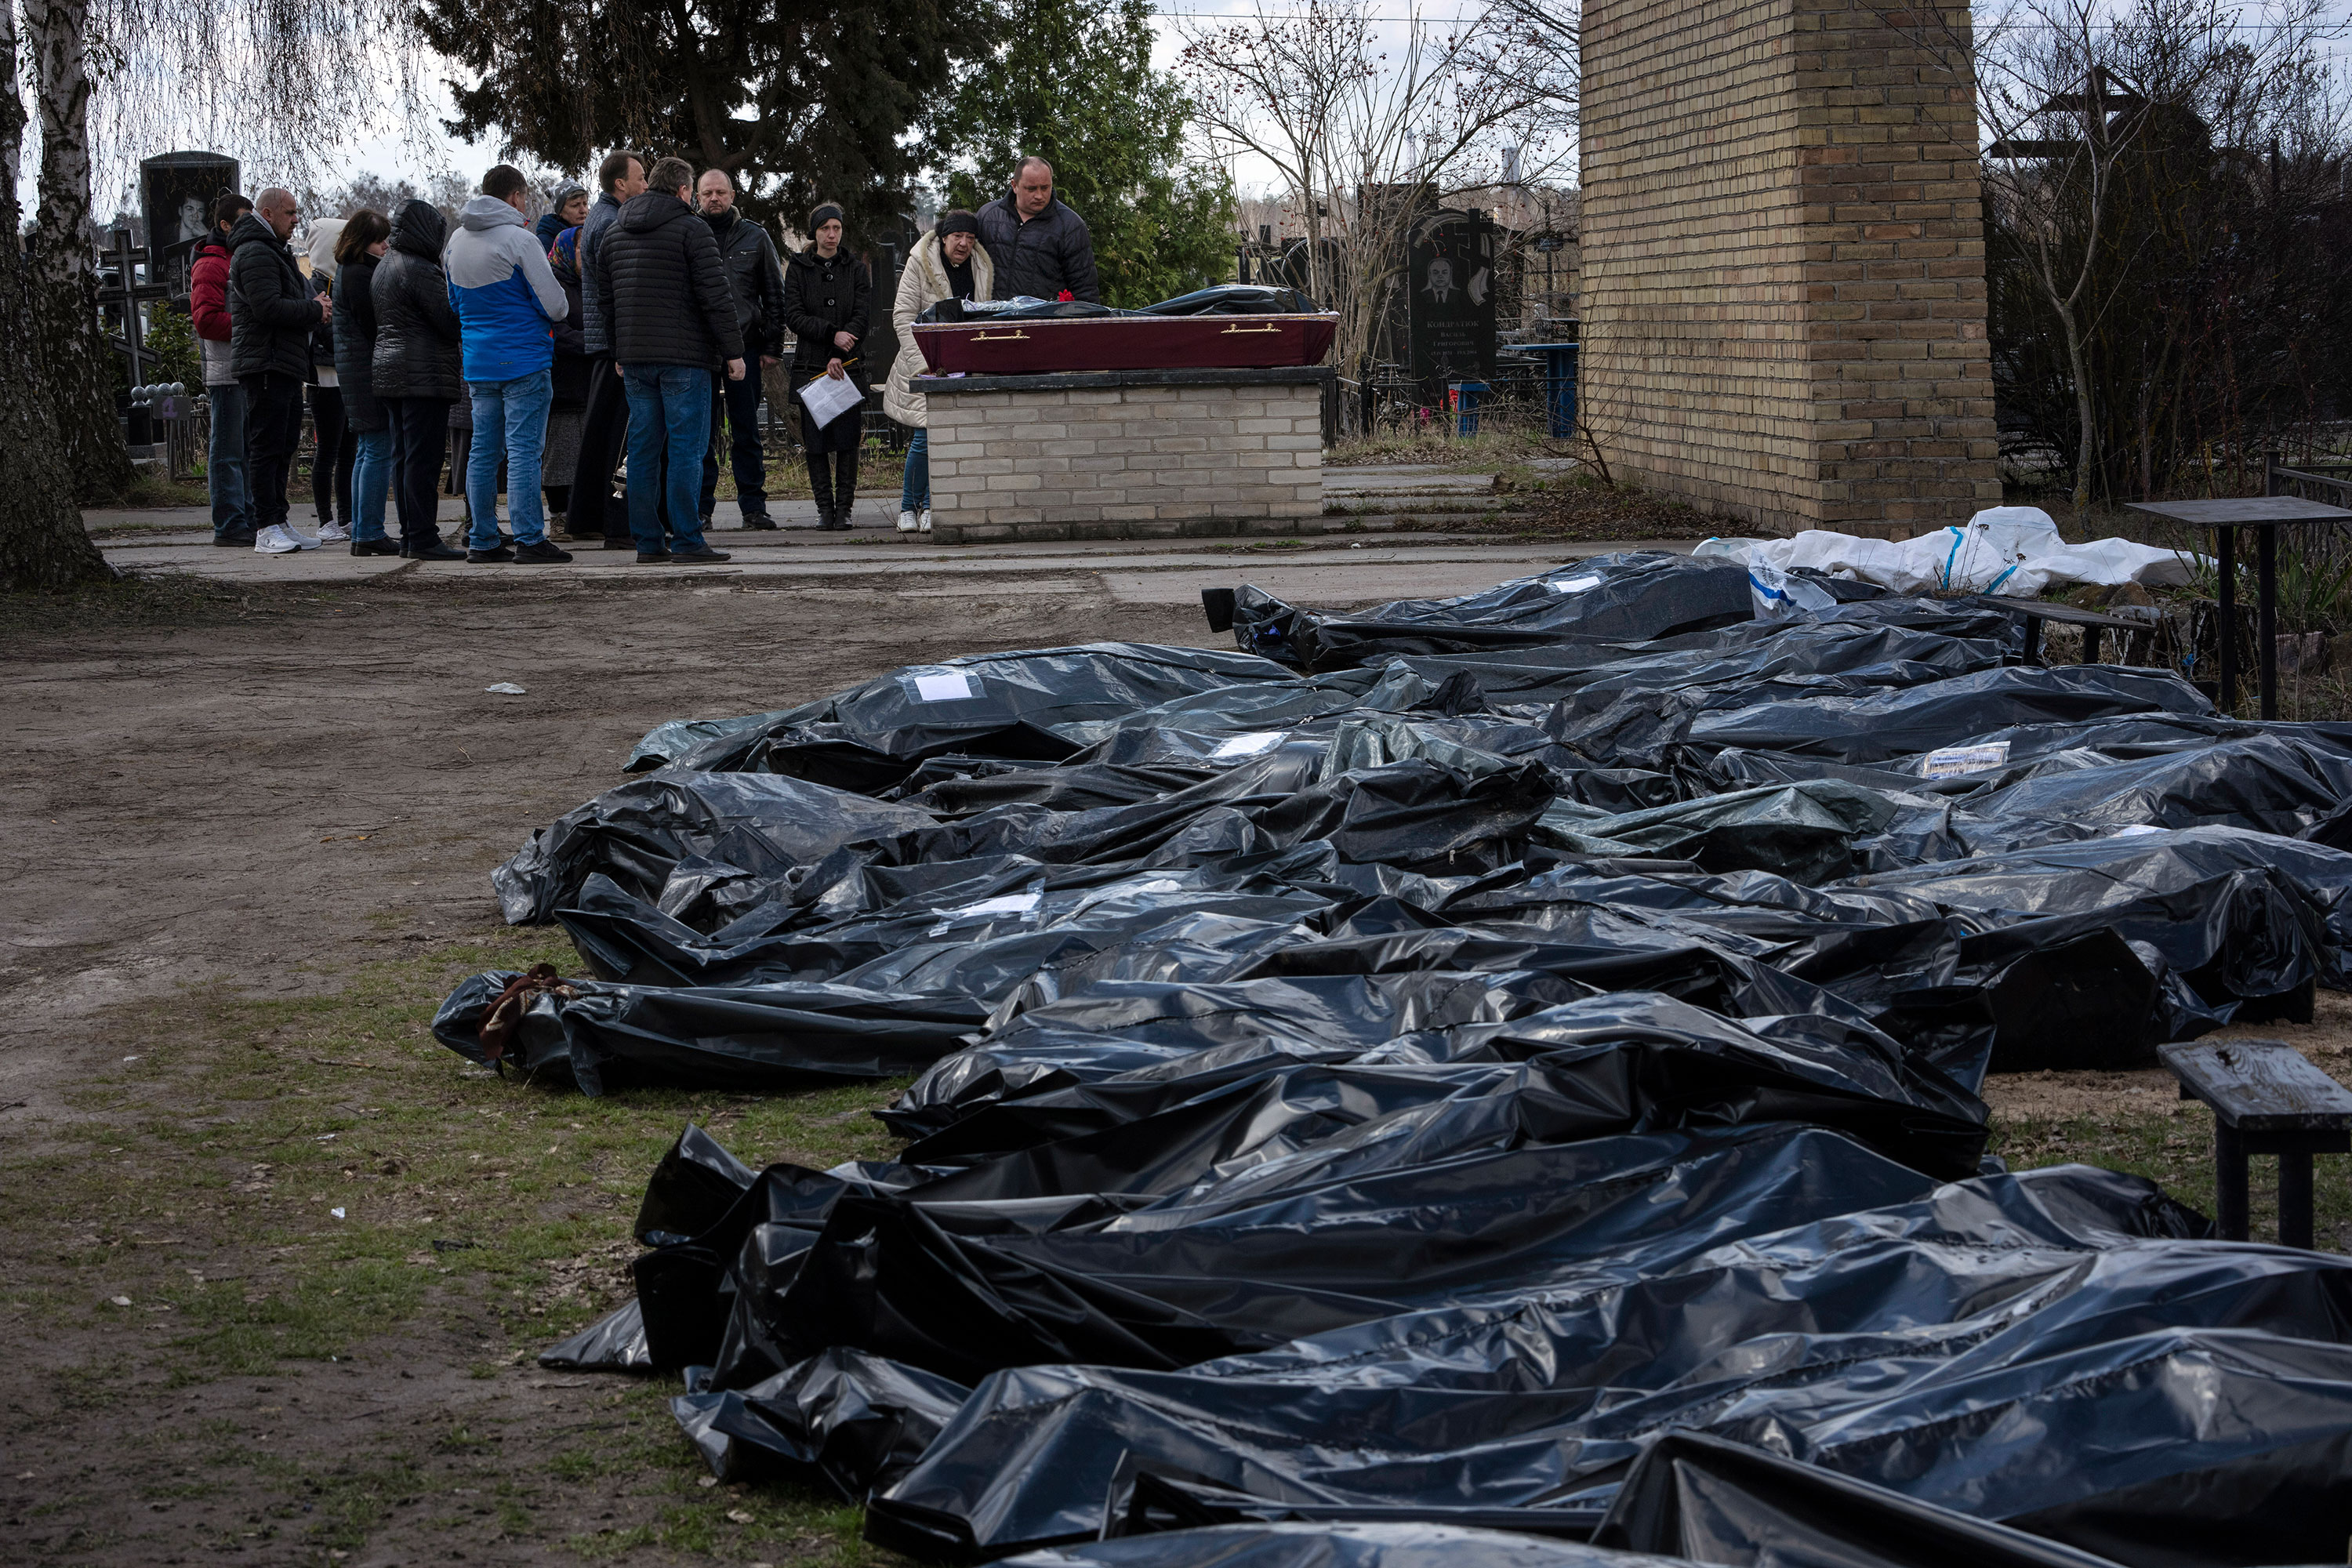 A family mourns a relative killed during the fighting as dozens of black bags containing more bodies lay nearby in a cemetery in Bucha, Ukraine, on April 11.